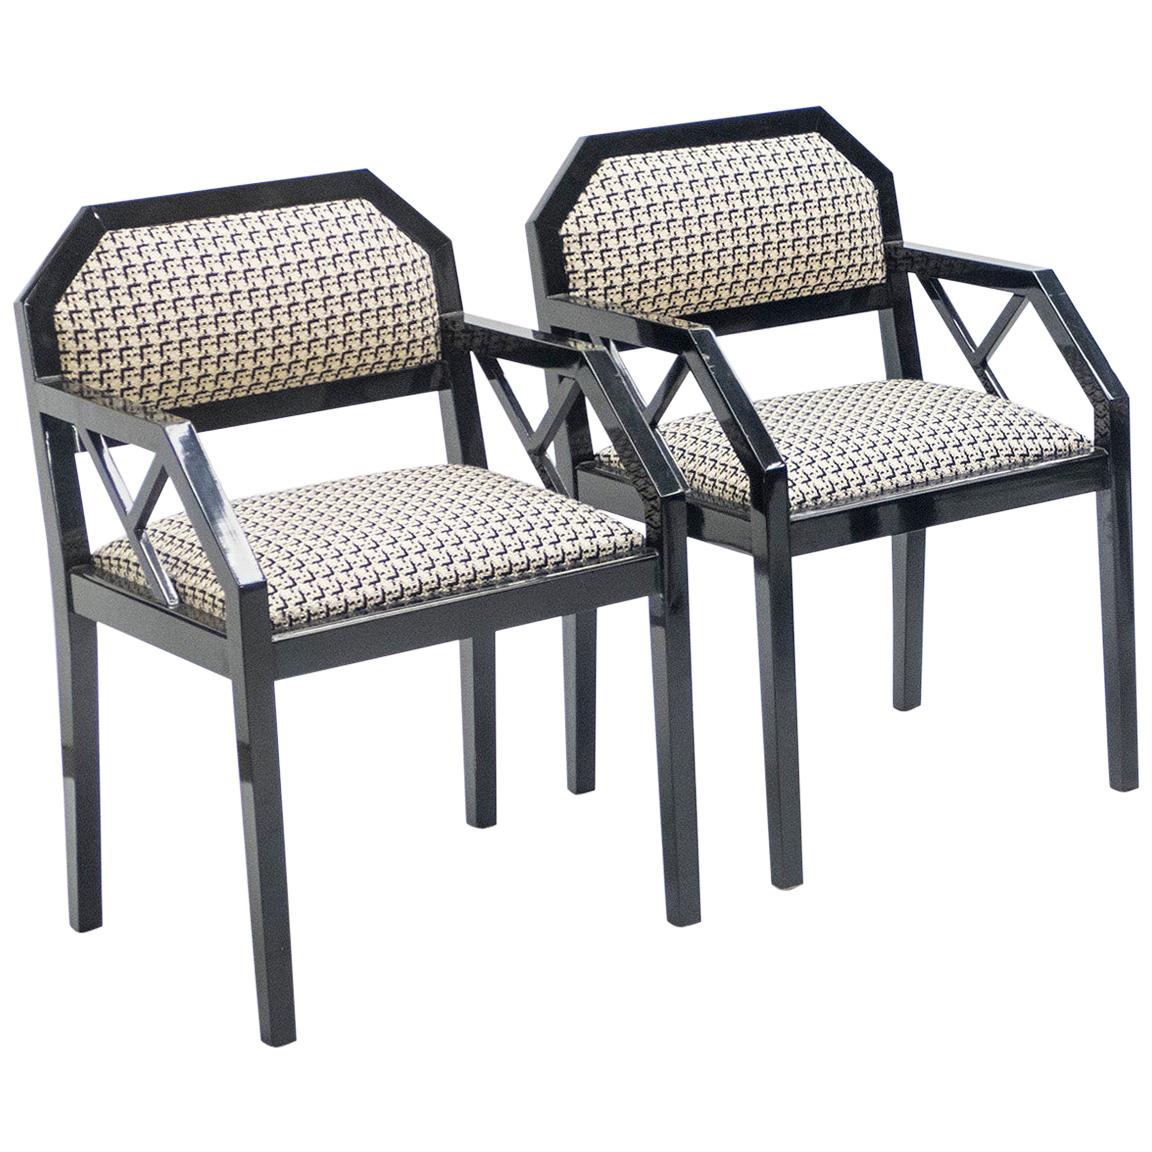 Rare Pair of Black Lacquer Chairs J.C. Mahey, 1970s For Sale